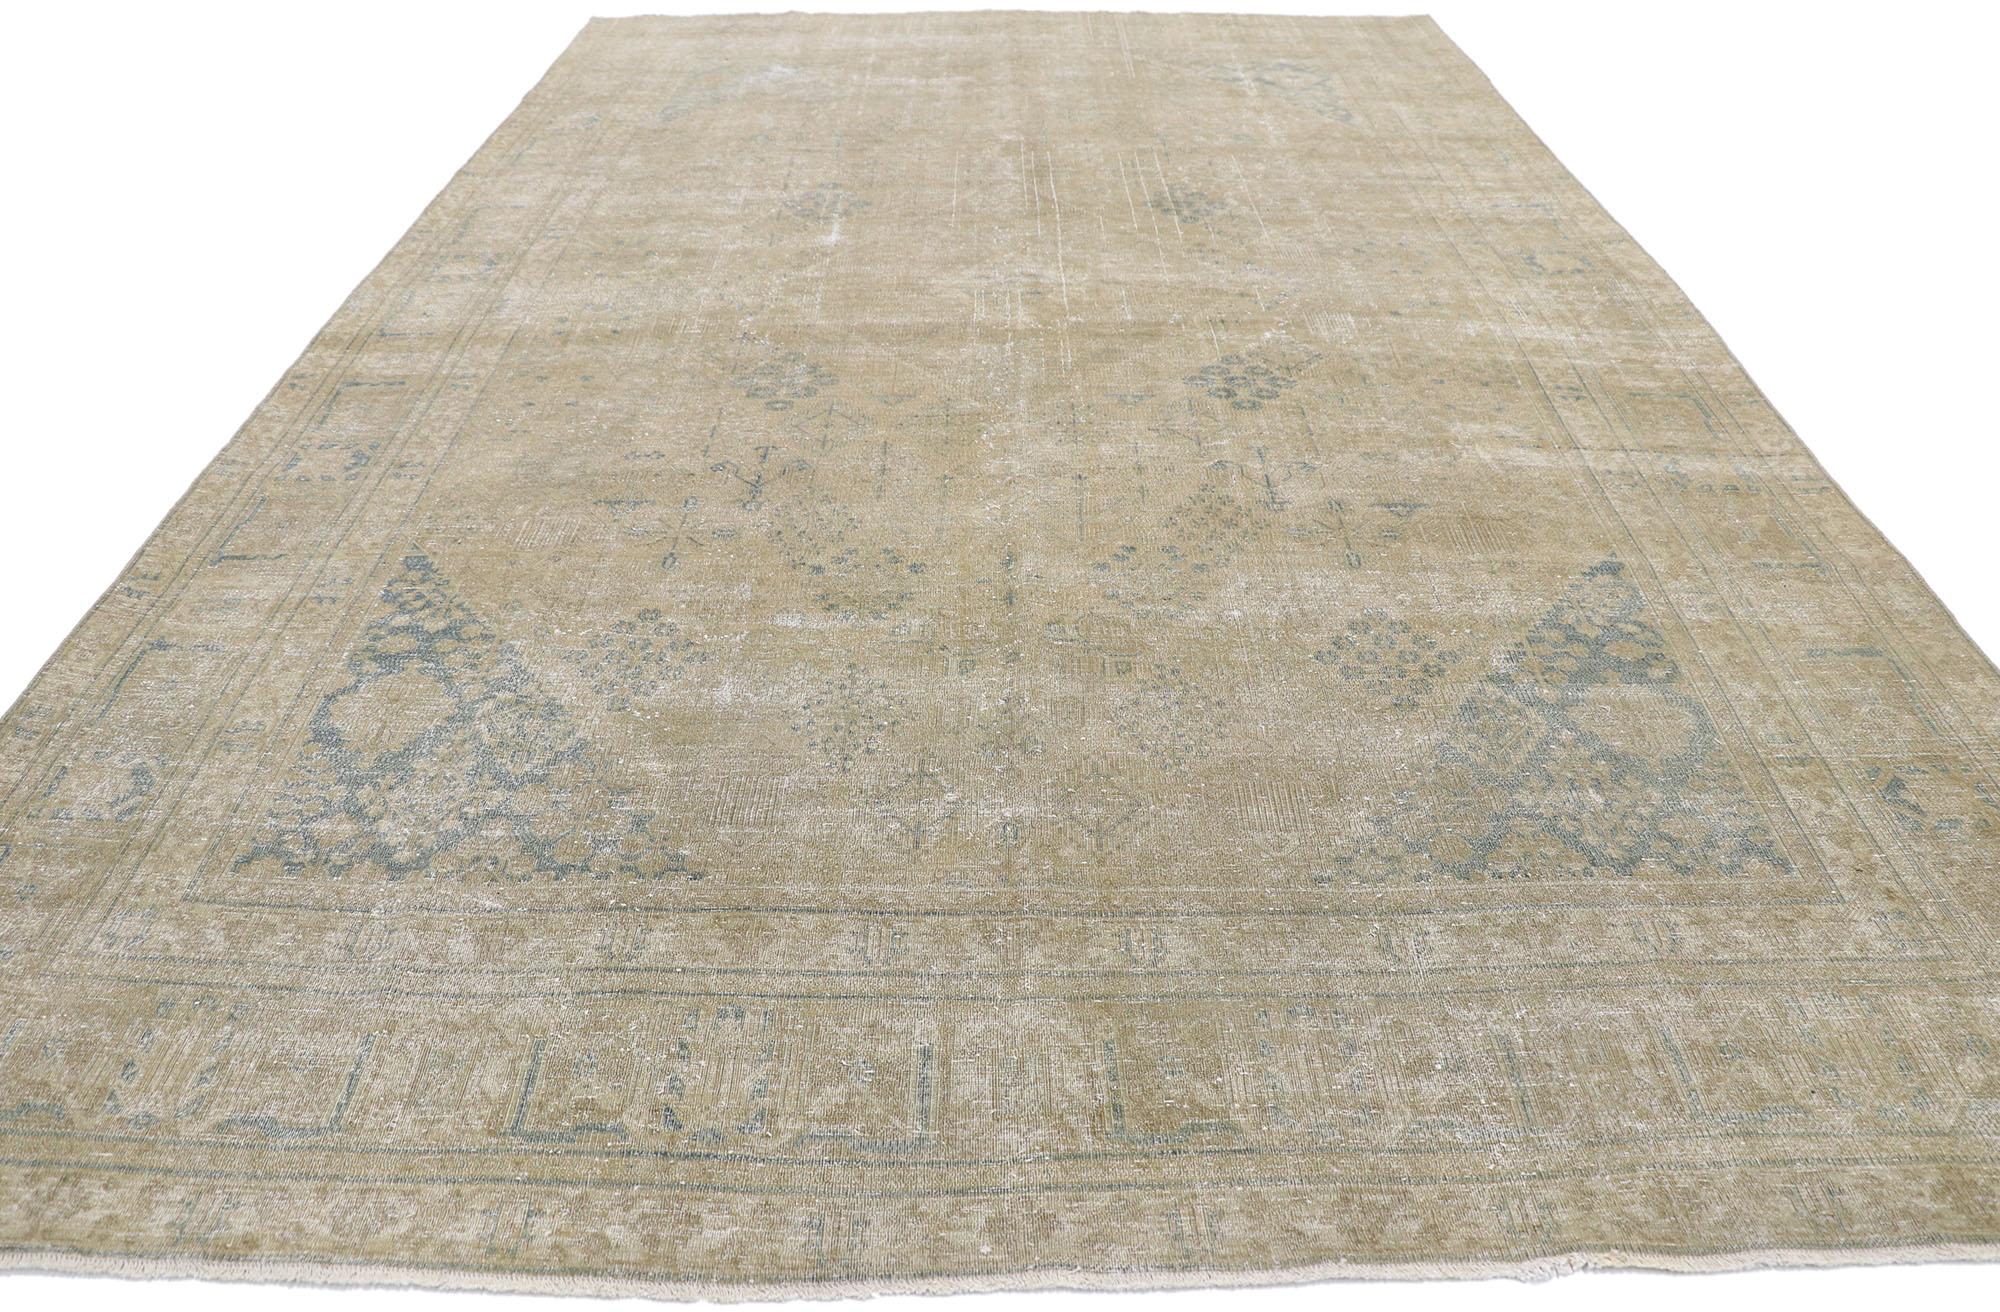 Malayer Distressed Antique Persian Tabriz Rug with Rustic Plantation Style For Sale